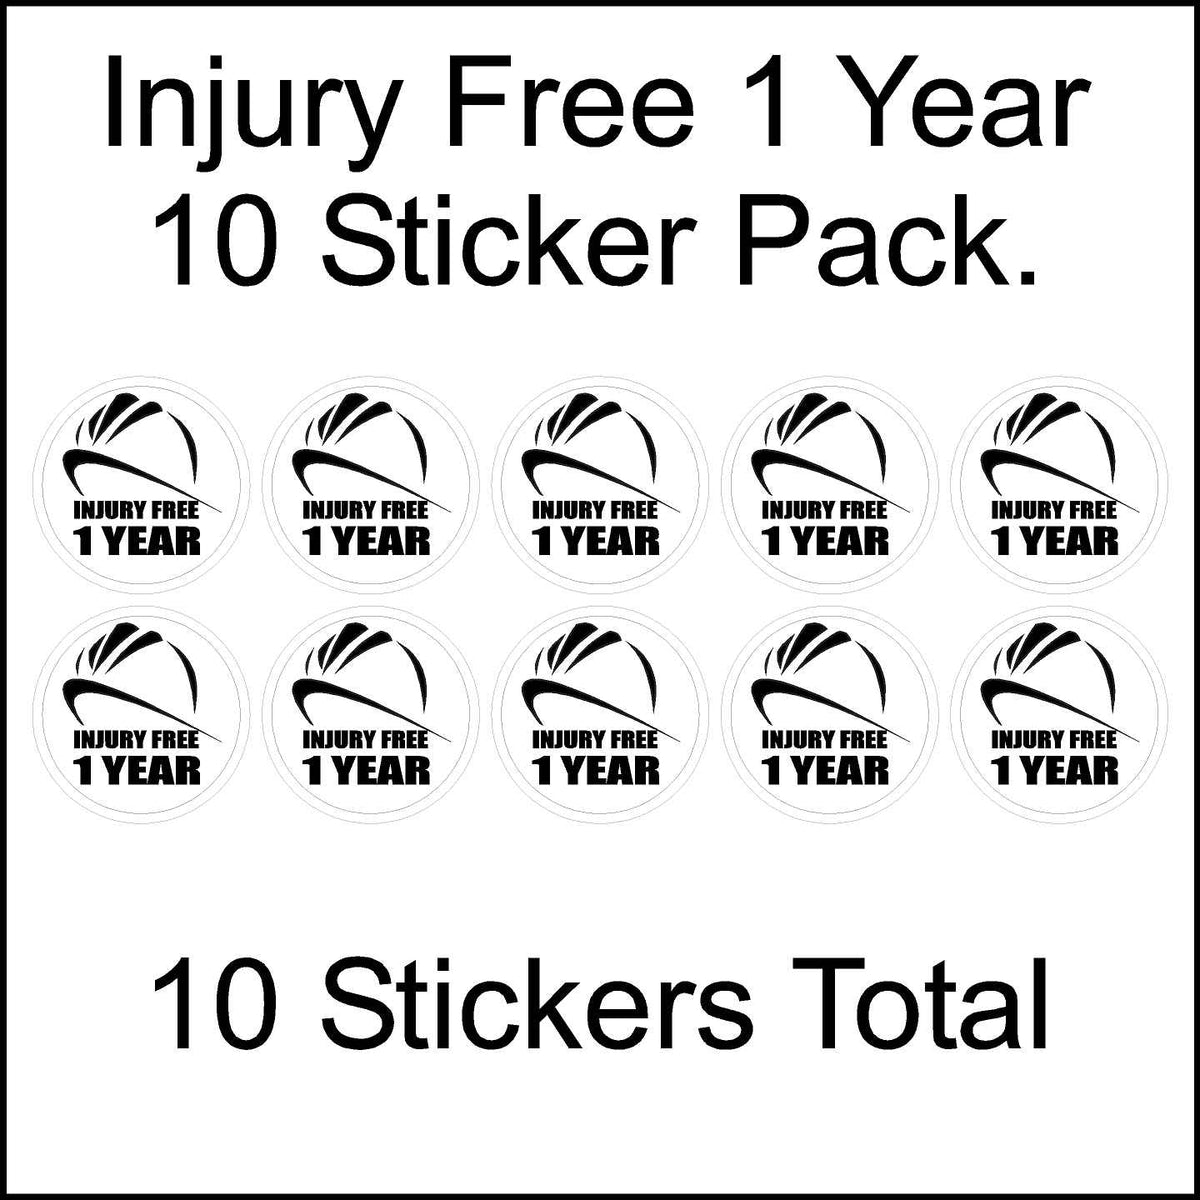 One year injury free sticker 10 pack. 10 stickers total.